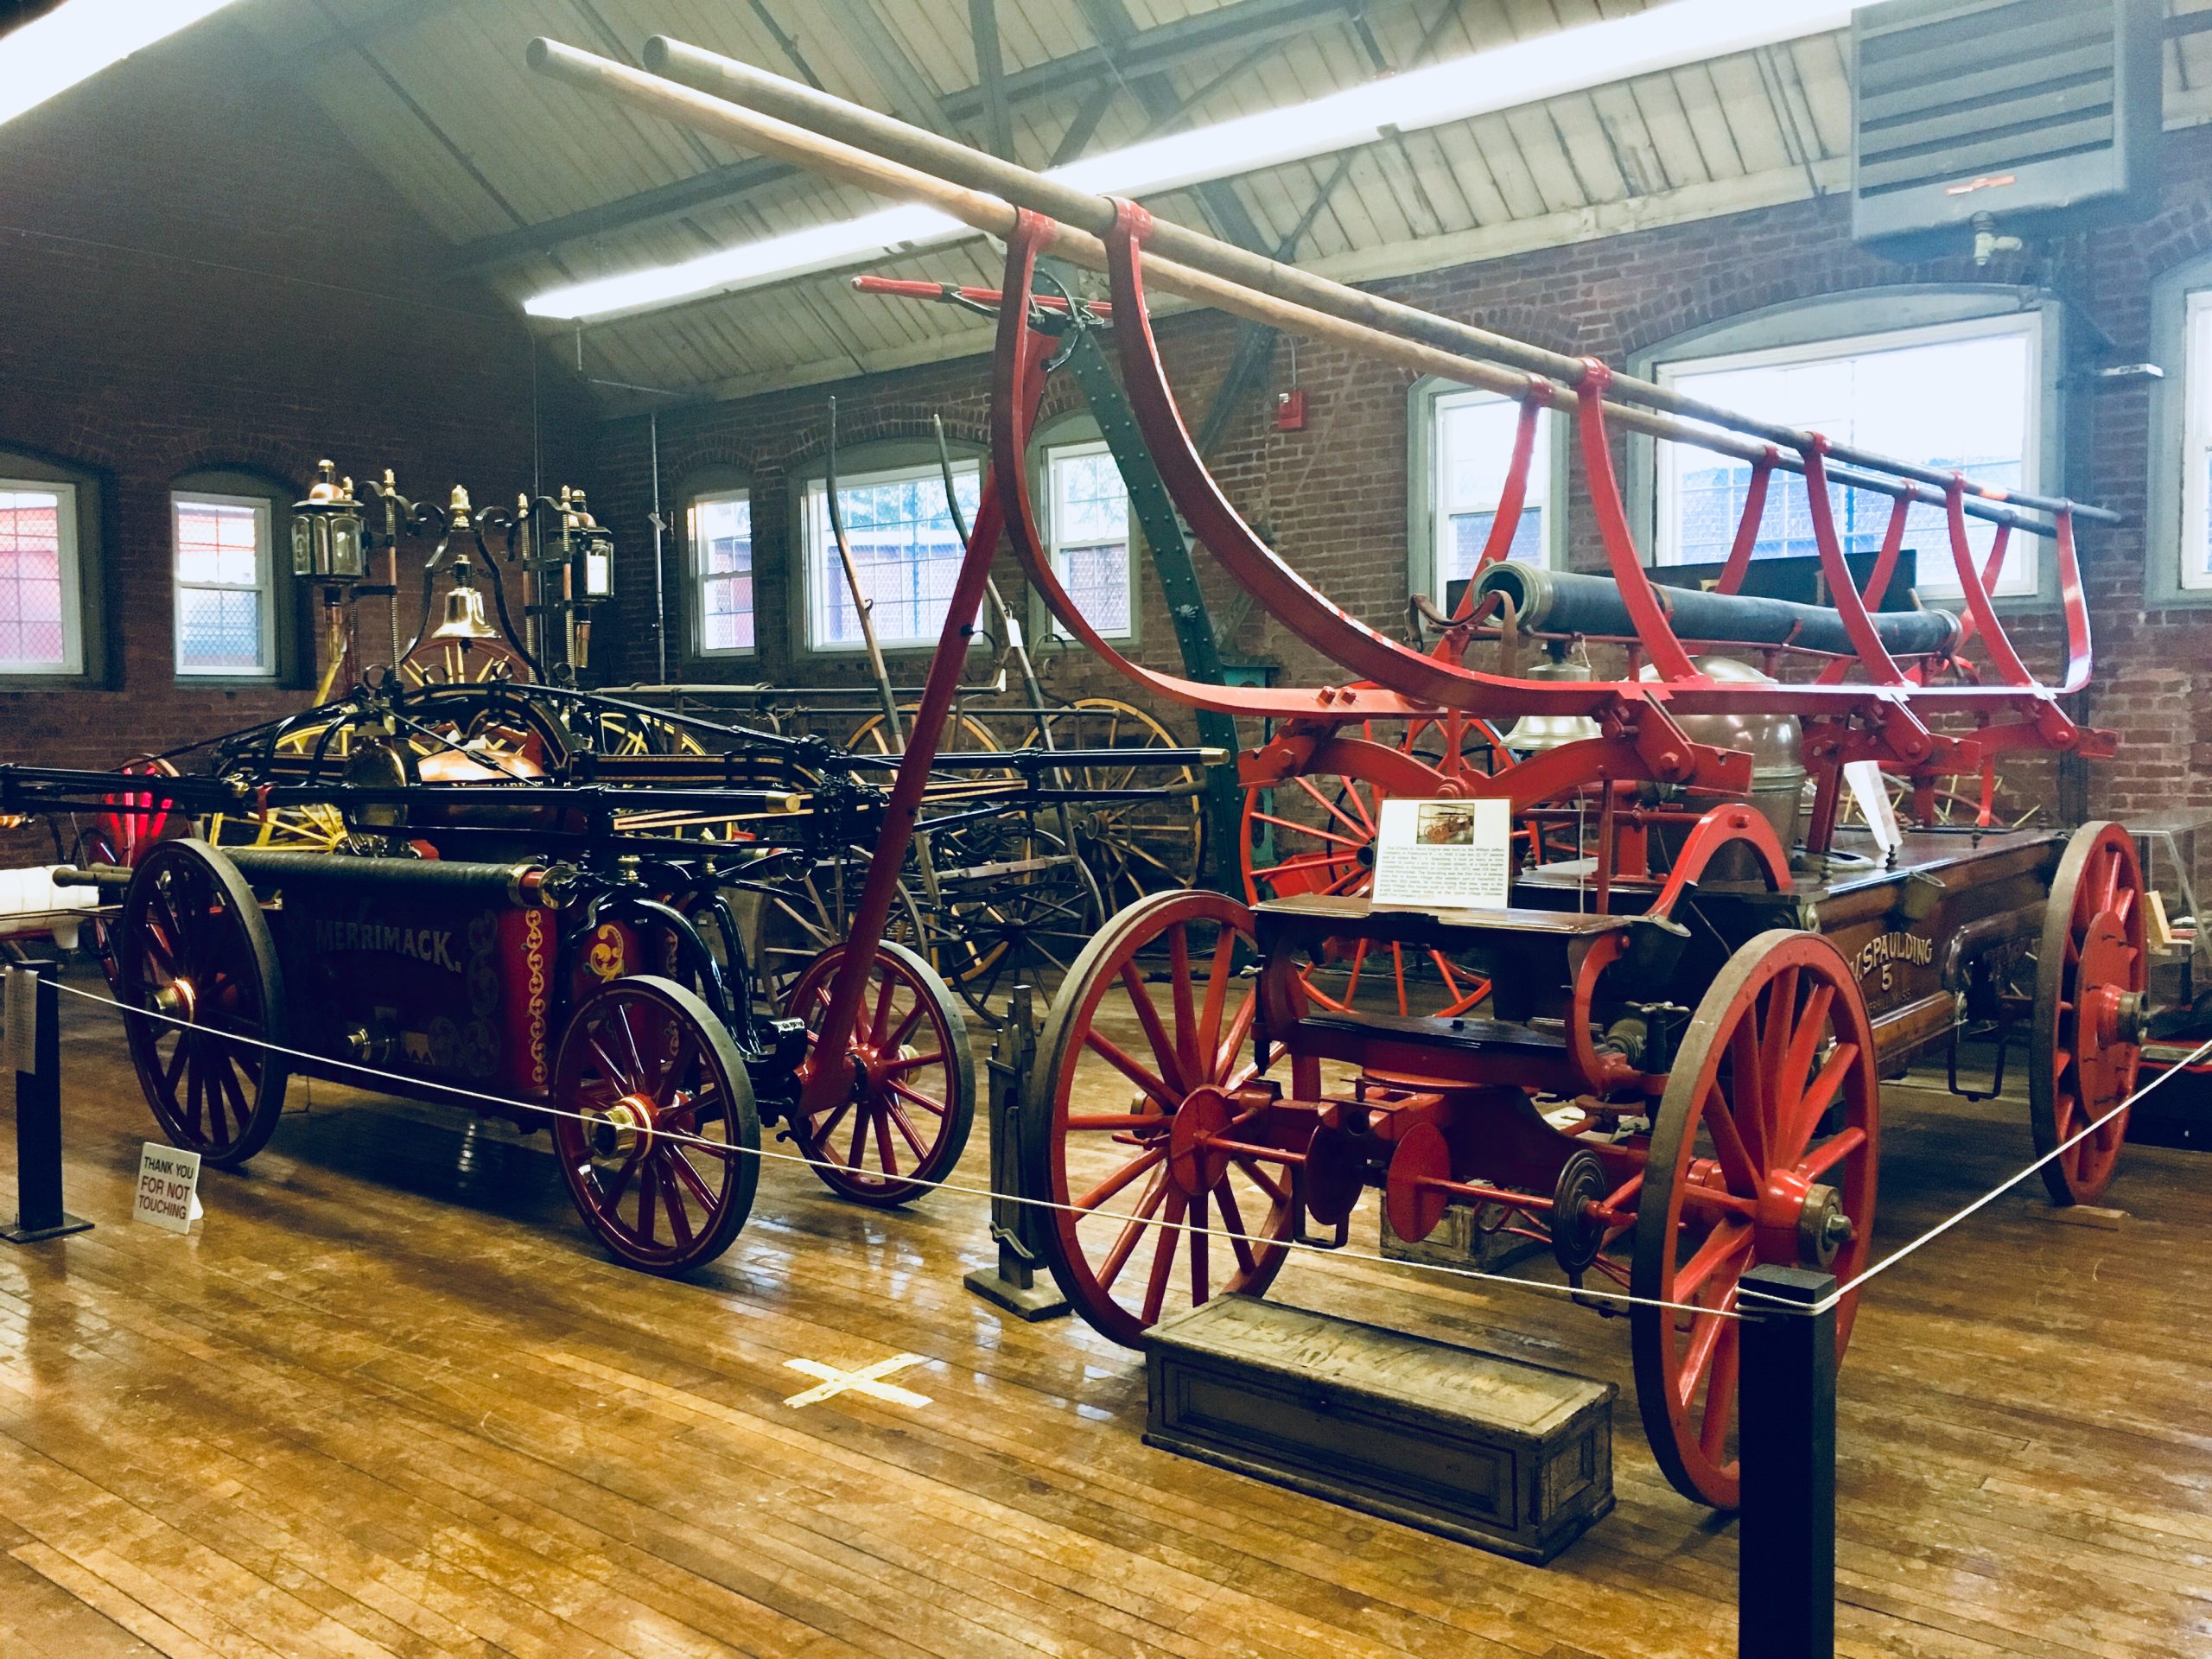 HAVERHILL FIRE FIGHTING MUSEUM